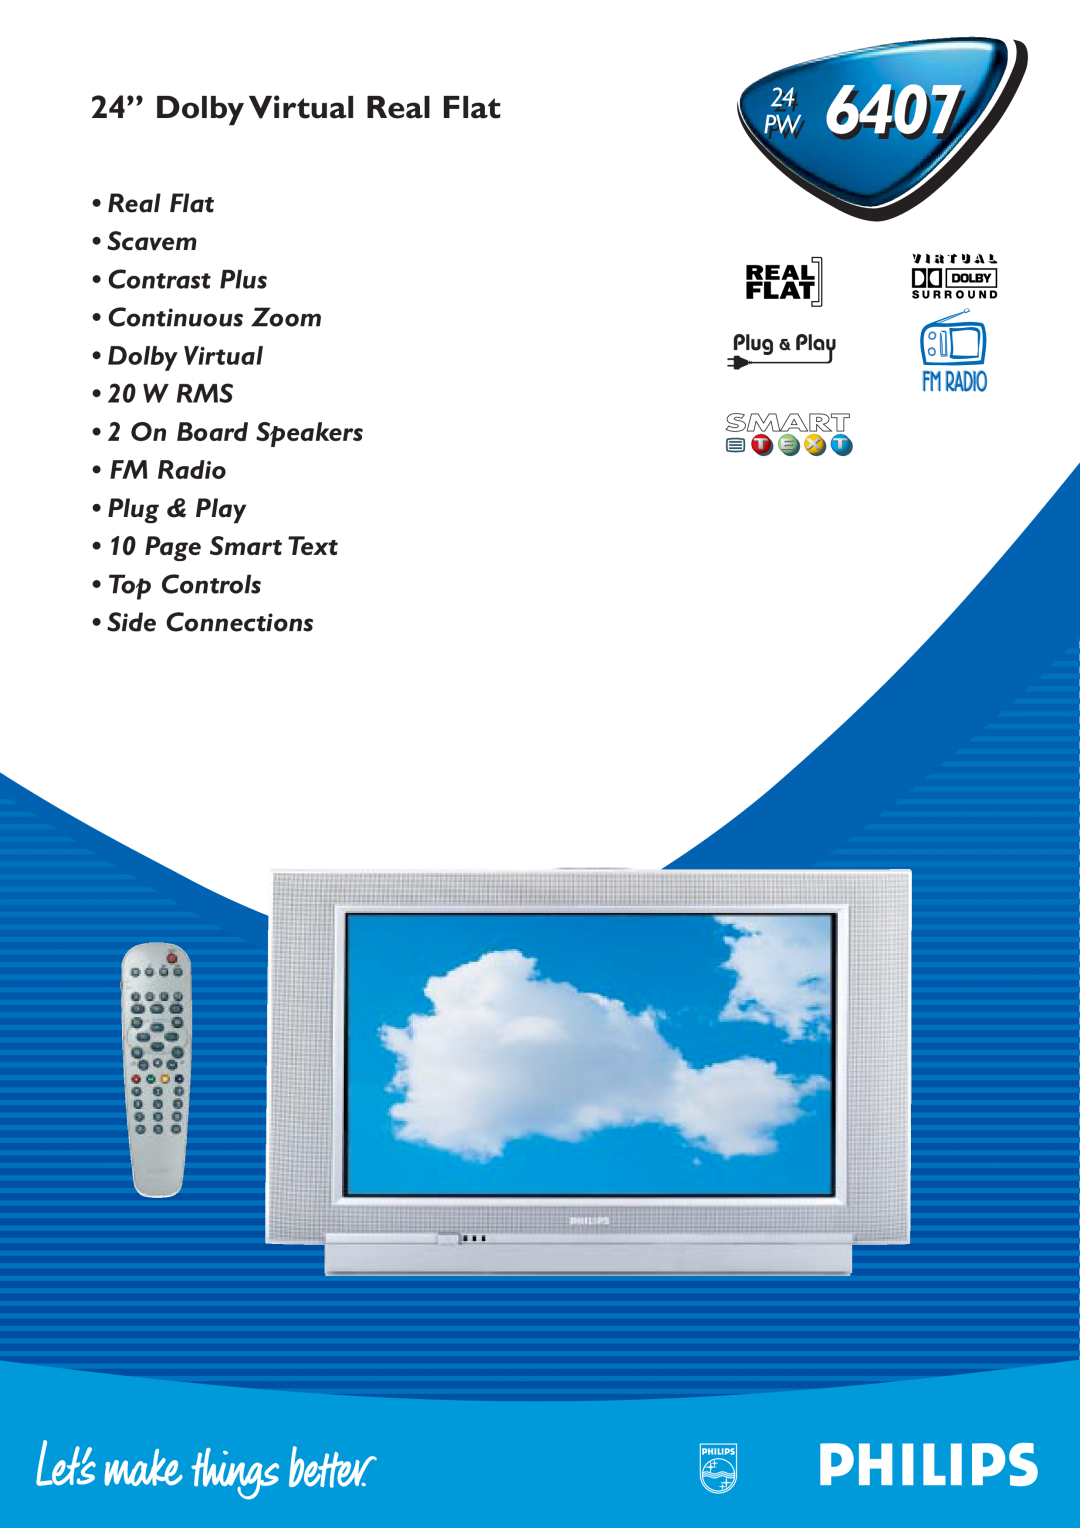 Philips 24PW6407 /01 manual 24” Dolby Virtual Real Flat24, On Board Speakers FM Radio Plug & Play 10 Page Smart Text 